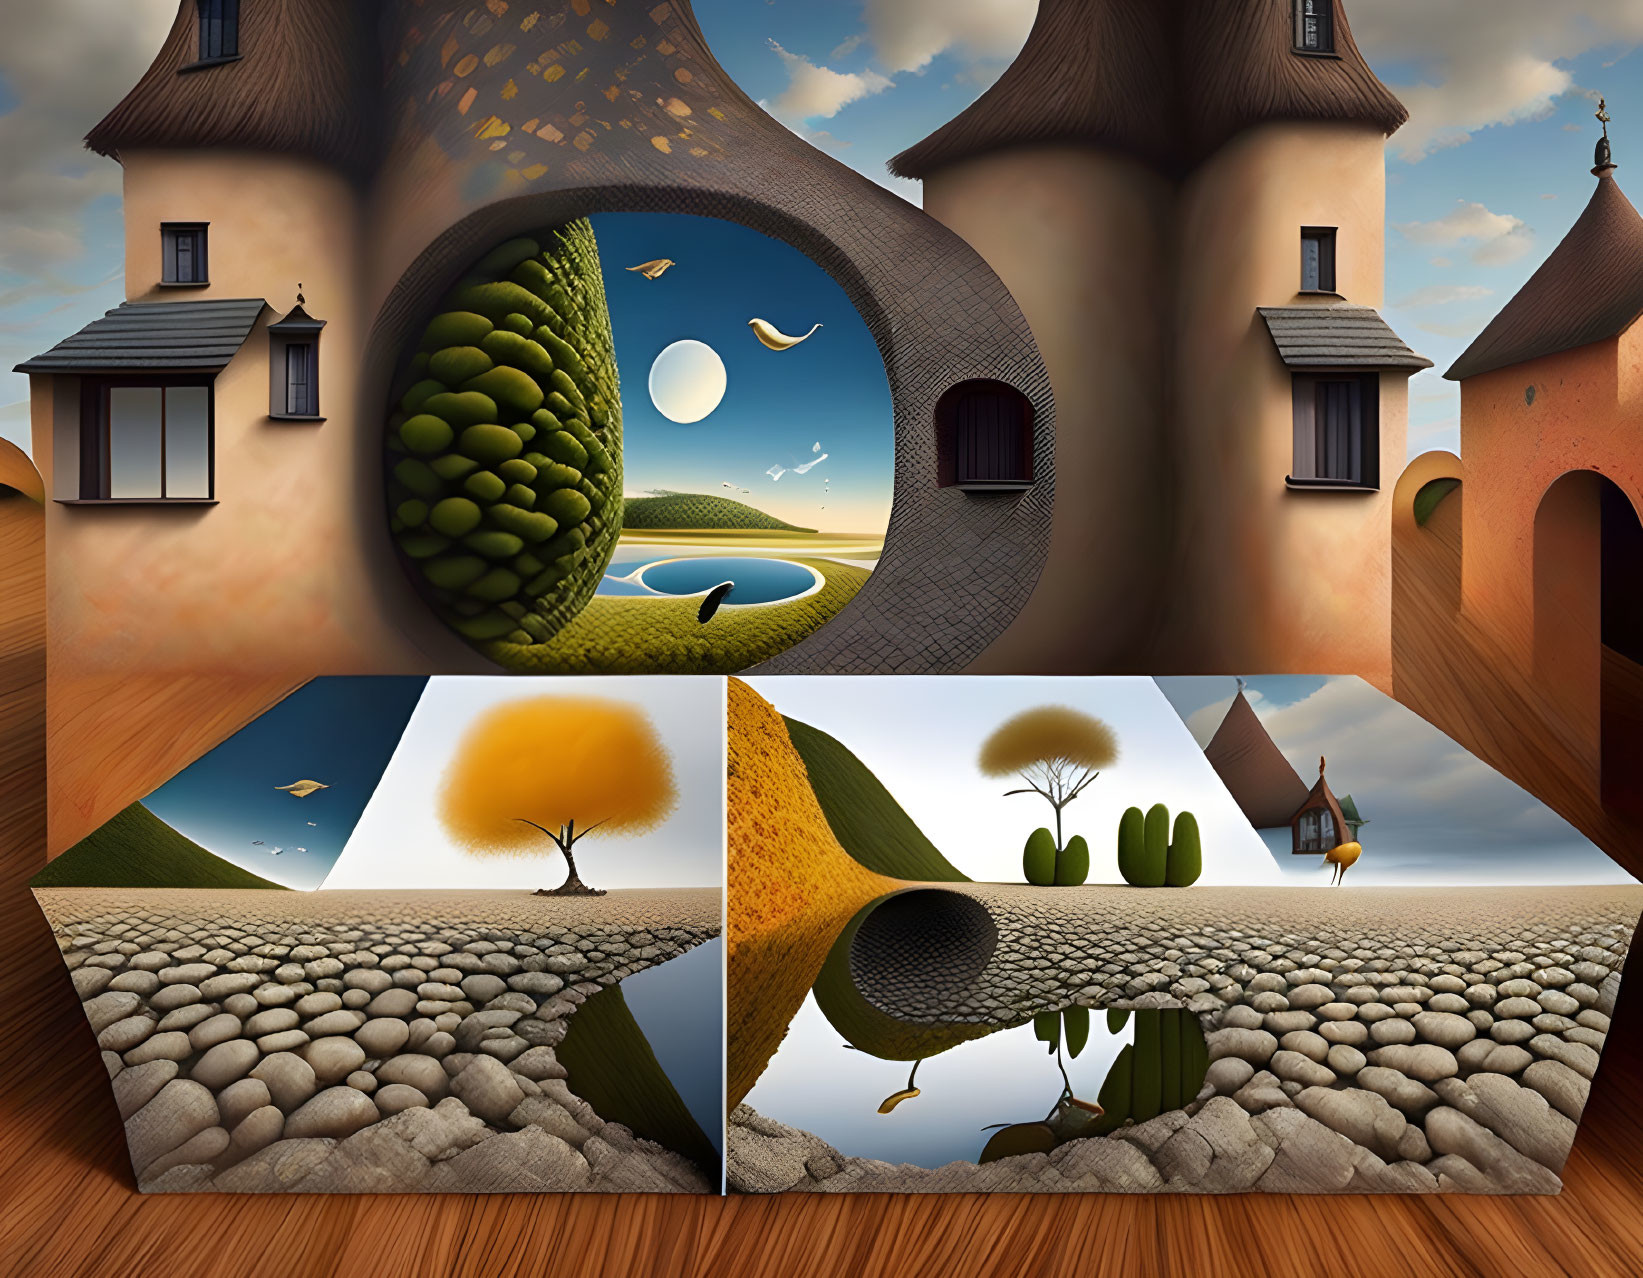 Surreal artwork: interior and exterior scenes blend with trees, birds, and structures